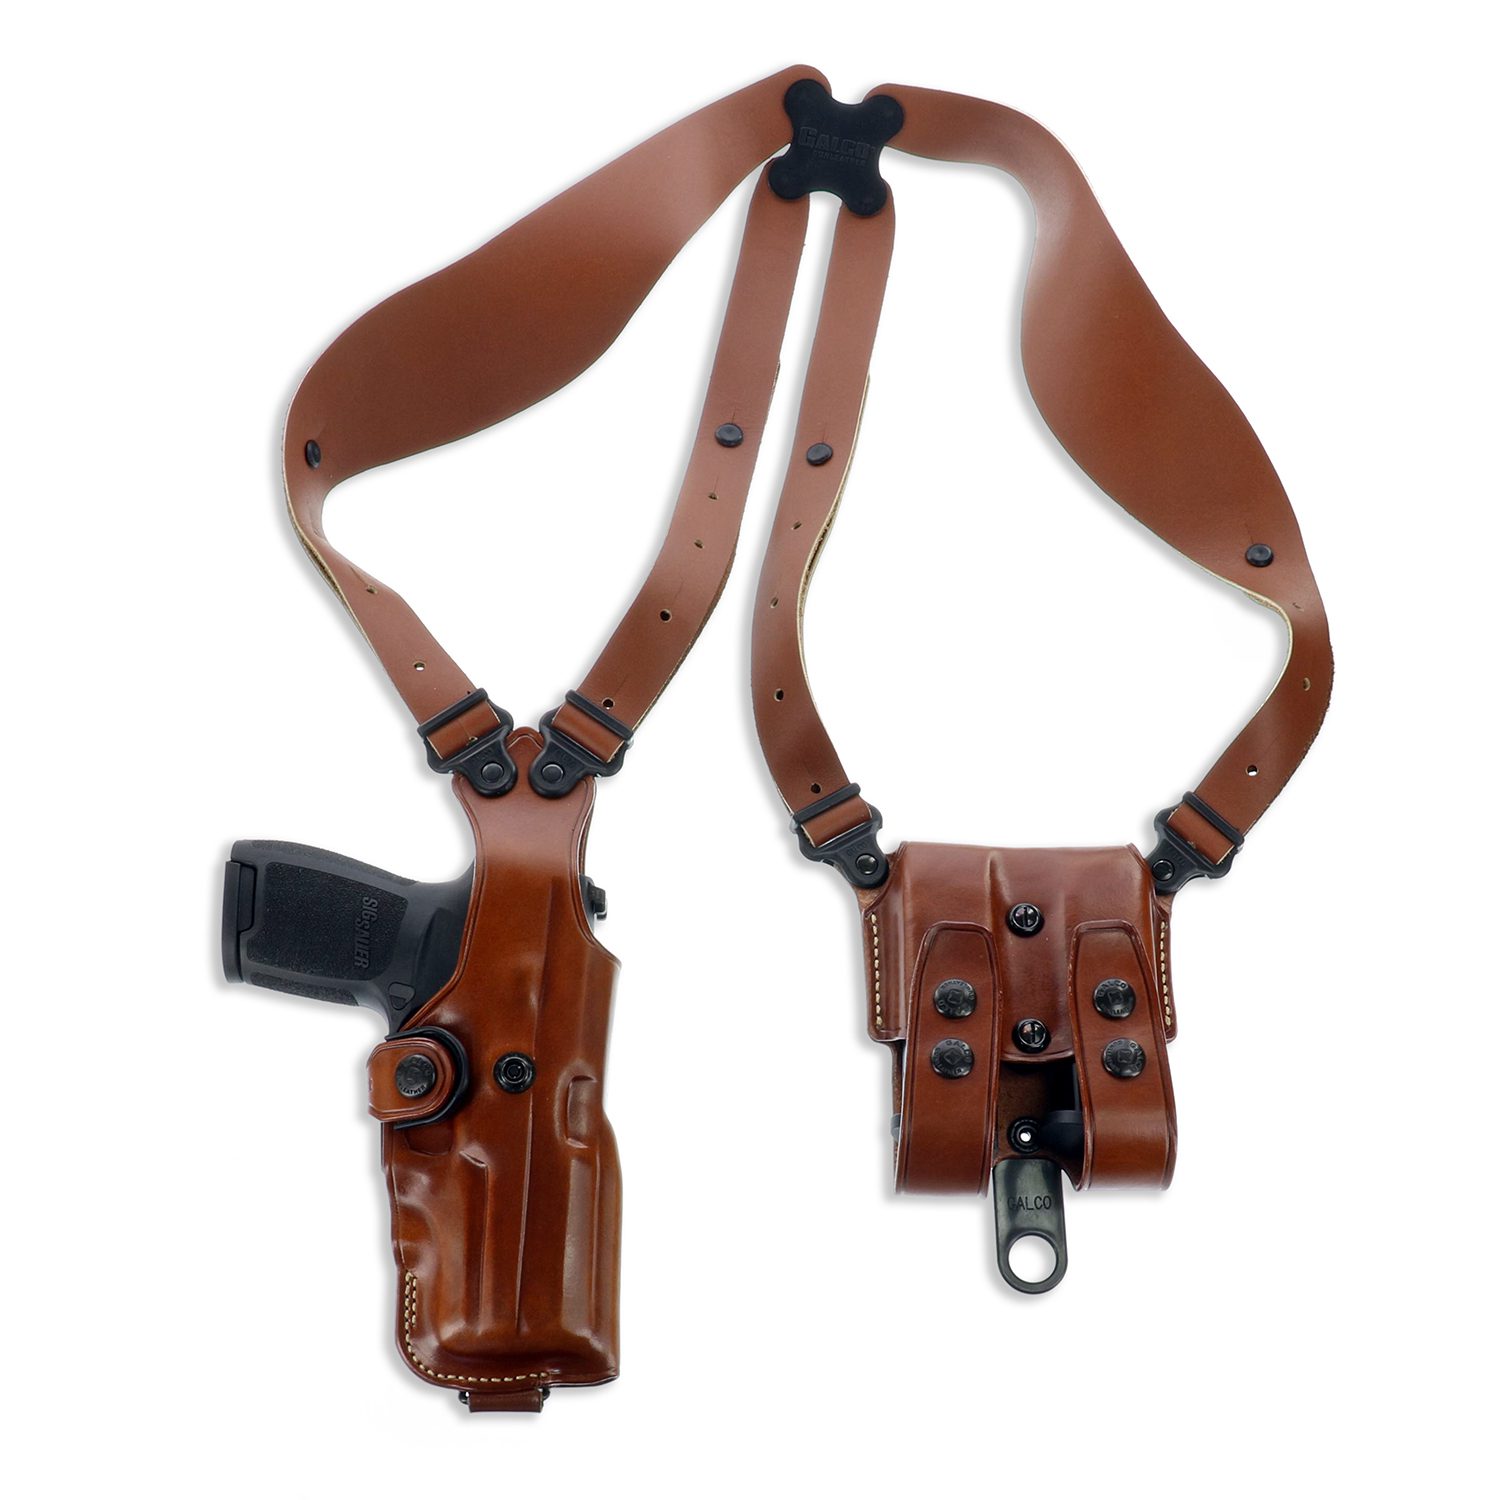 Galco Gunleather Vertical Holster System (VHS) 4.0 - Tactical & Duty Gear